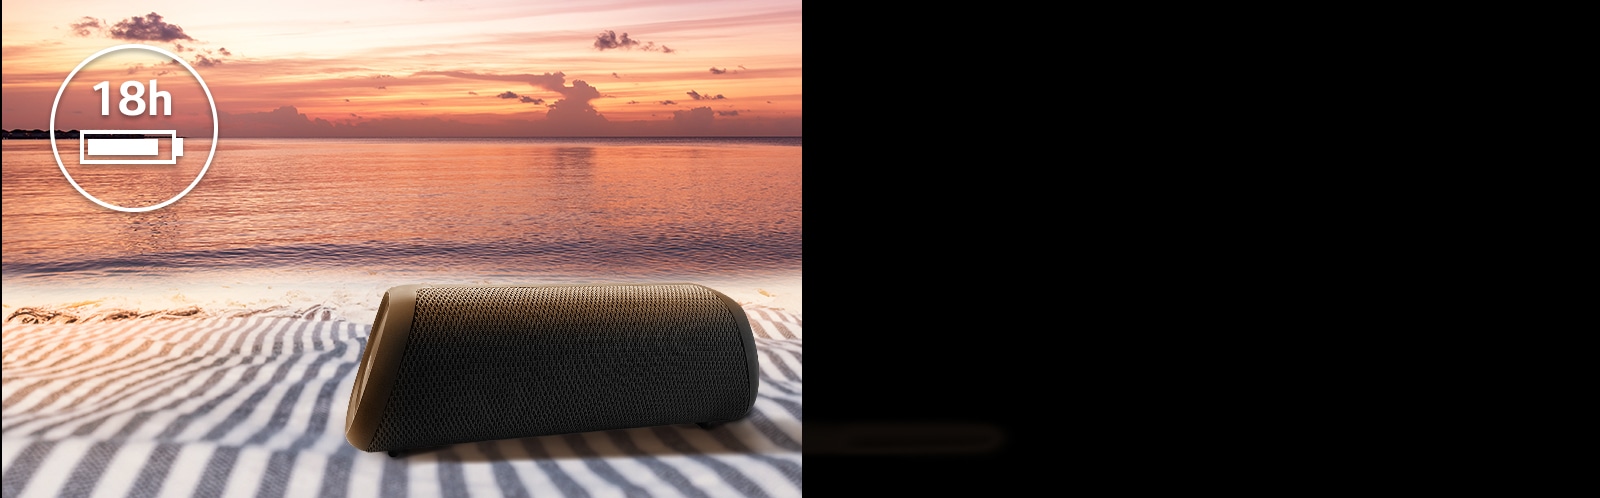 The speaker is placed on a beach towel. In front of the speaker, it shows sunset beach to illustrate that this speaker can be played up to 18 hours.